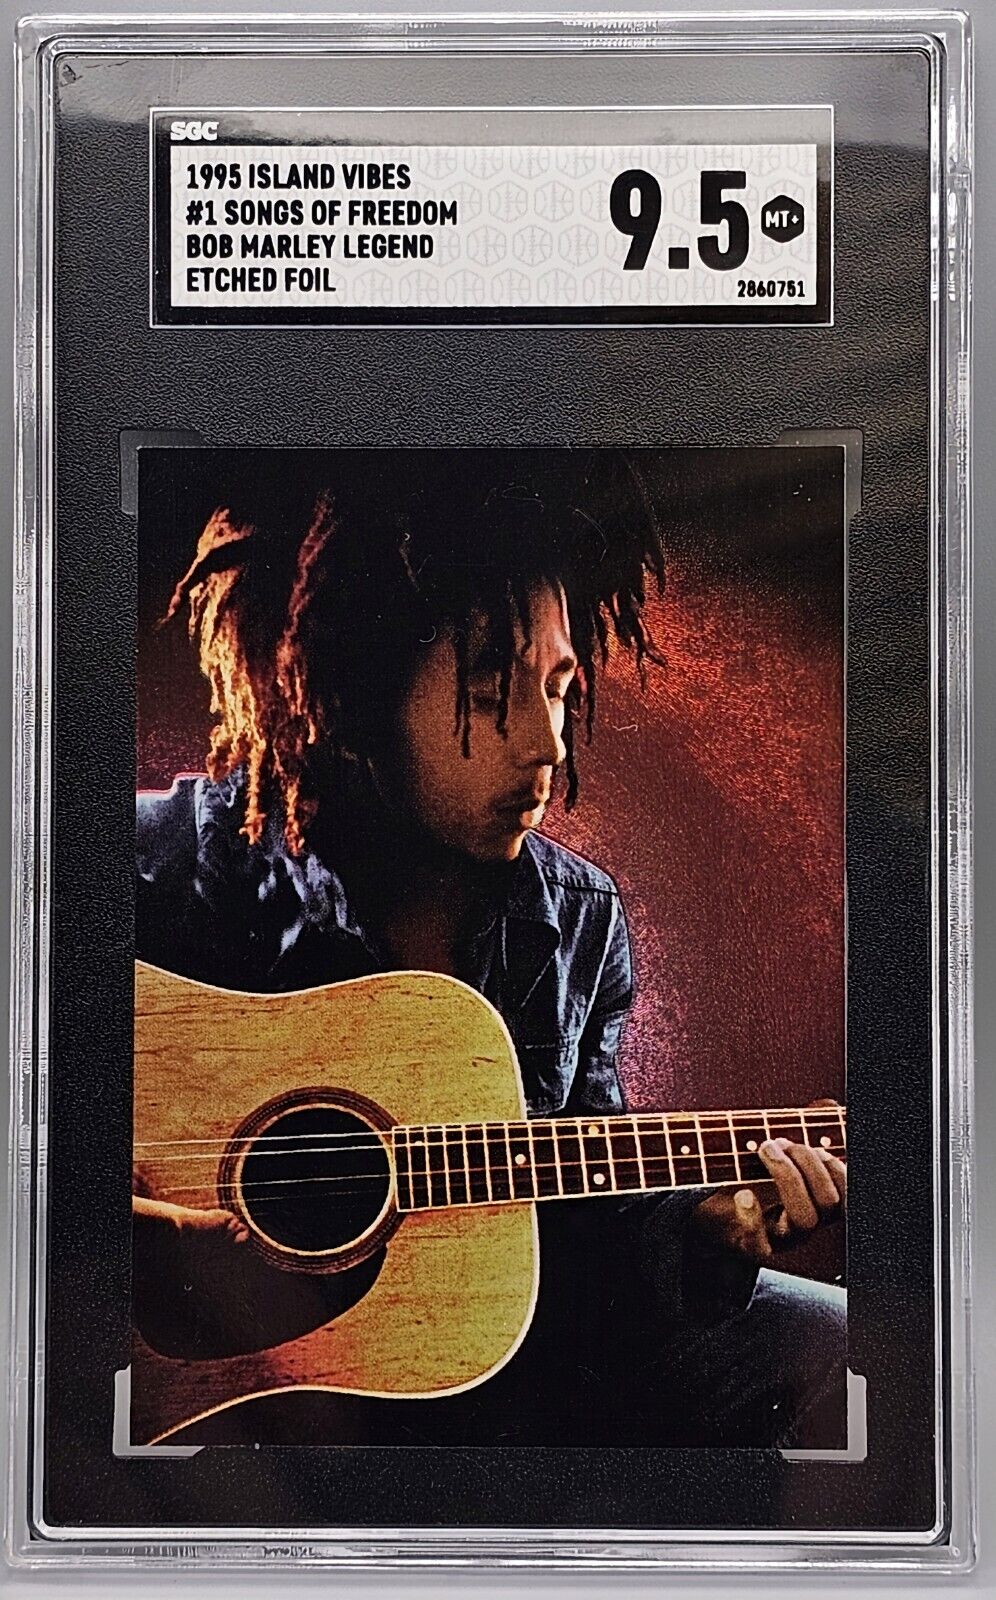 Bob Marley Legend 1995 Island Vibes #1 Songs of Freedom ETCHED FOIL SGC 9.5 MT+